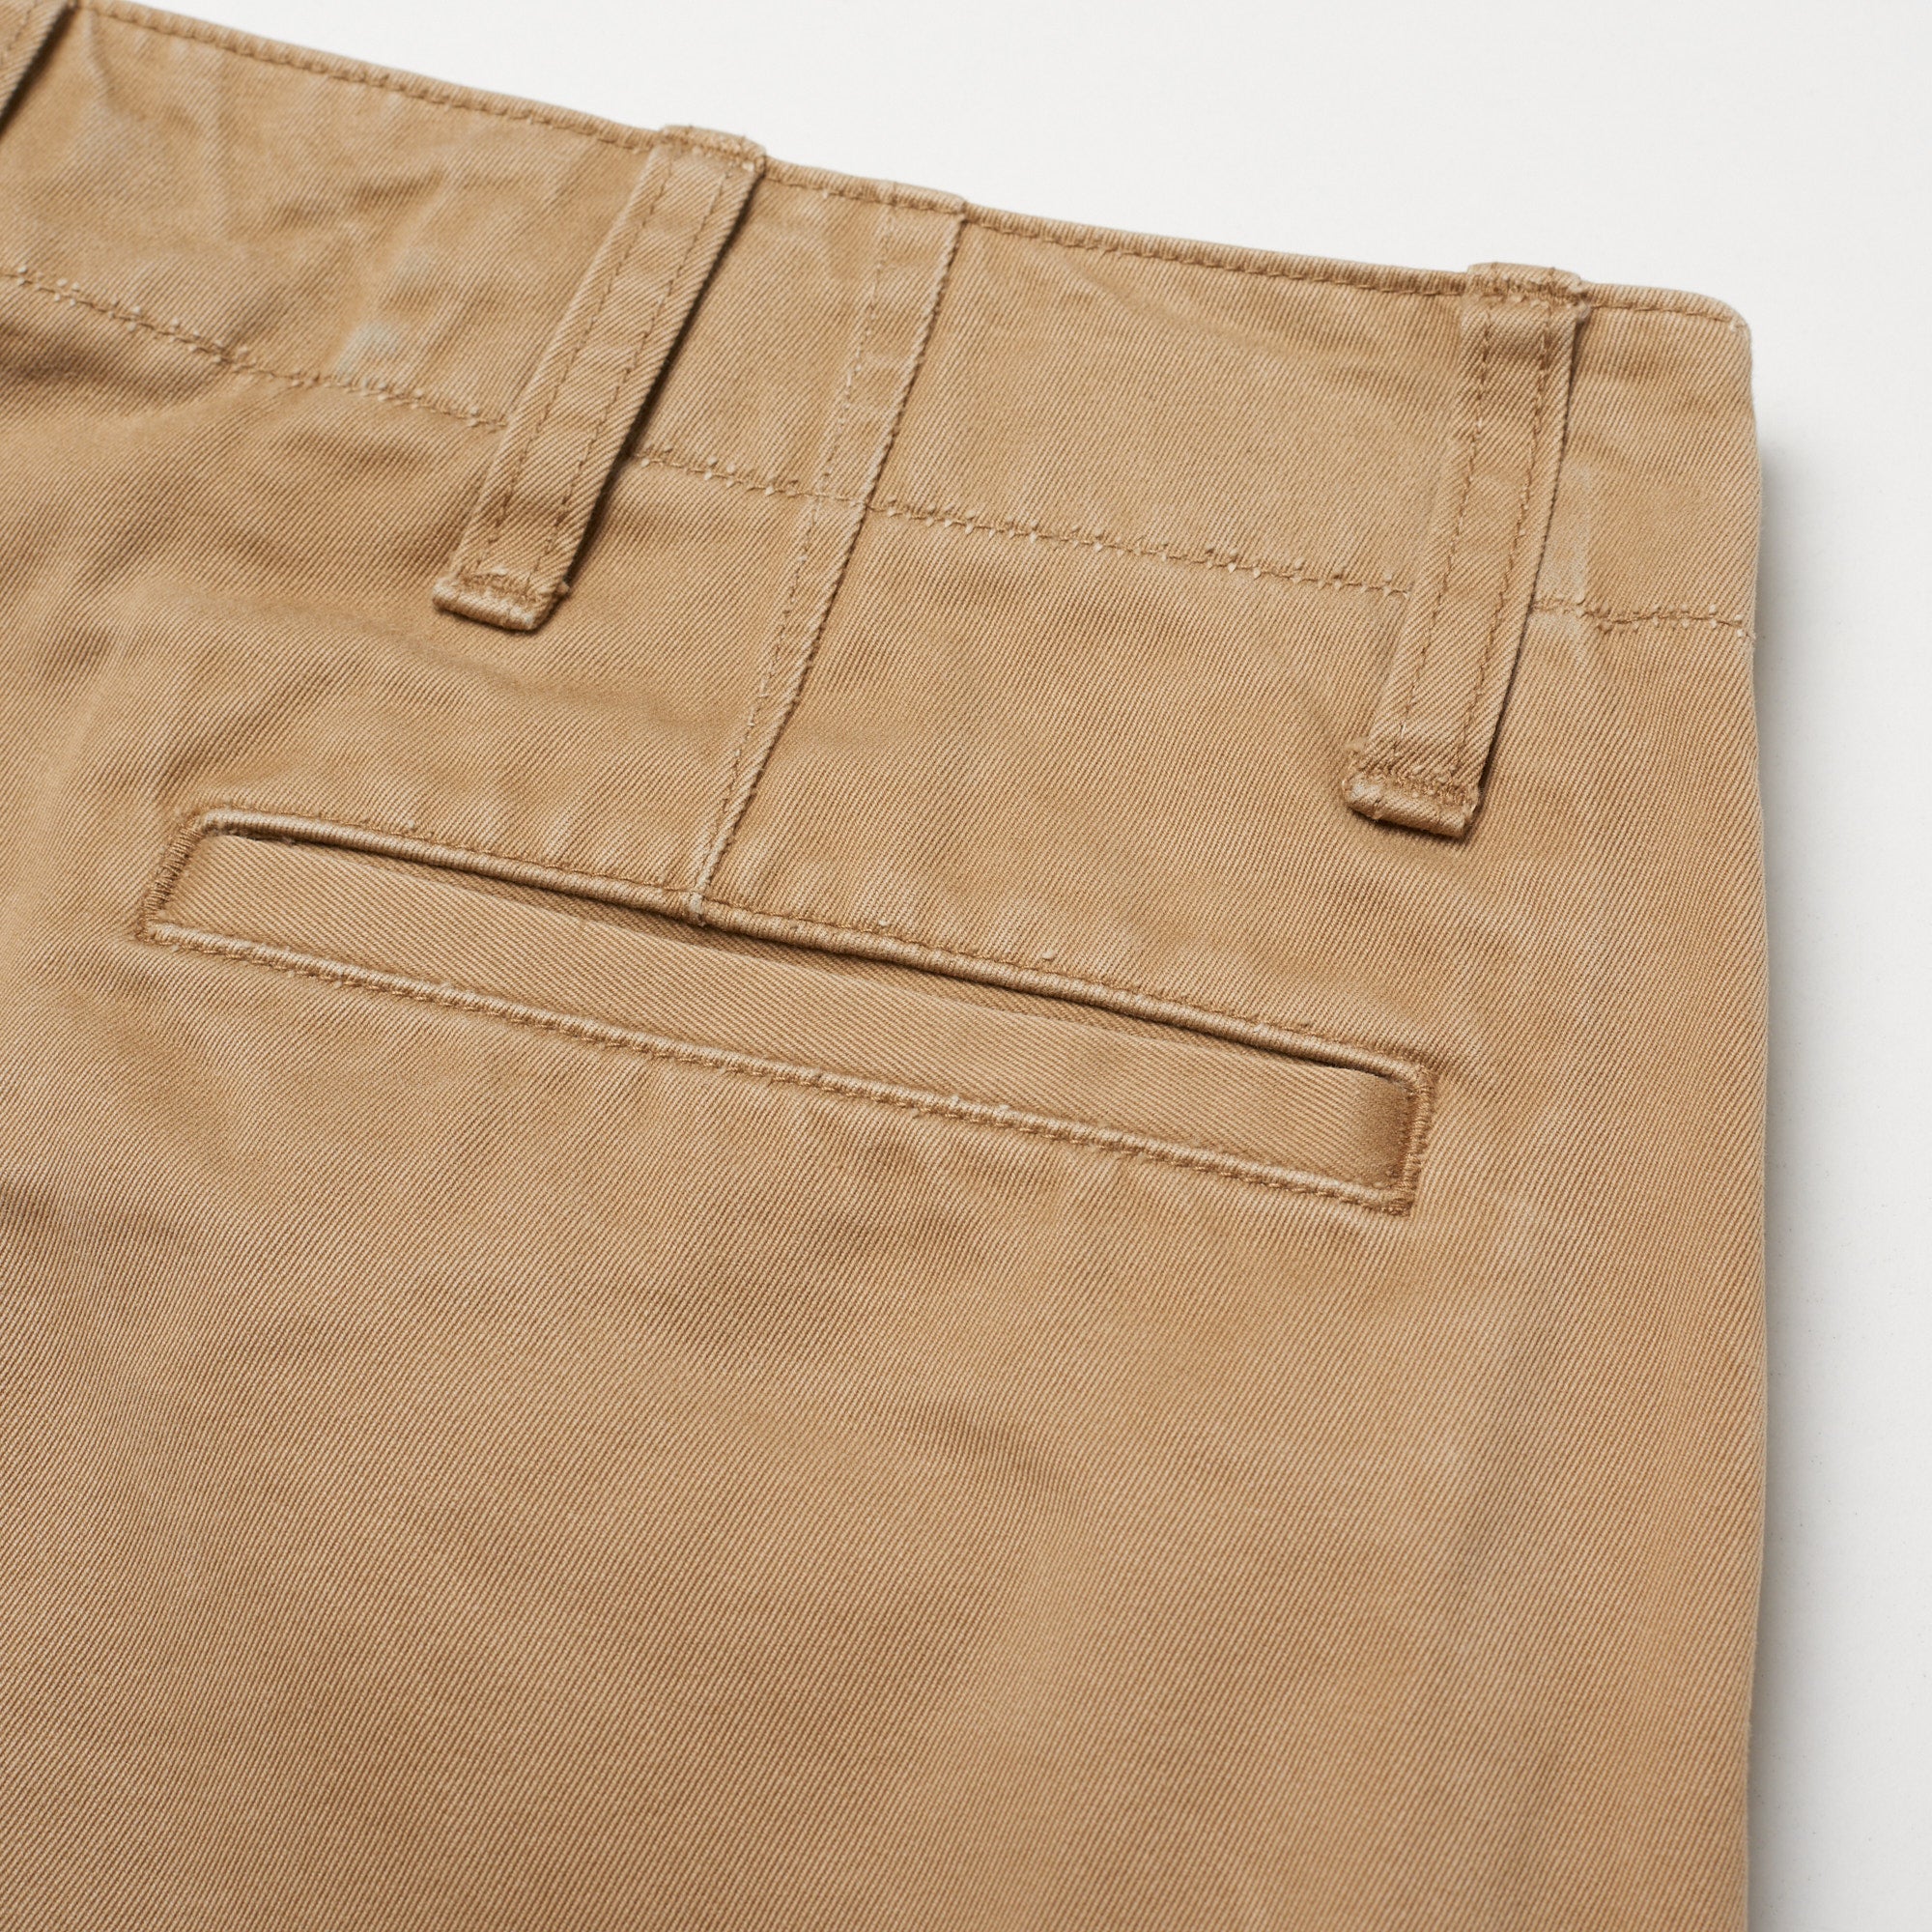 NIGEL CABOURN Tan Cotton Officer's Chino Pants US 33 34 Slim Fit Japan